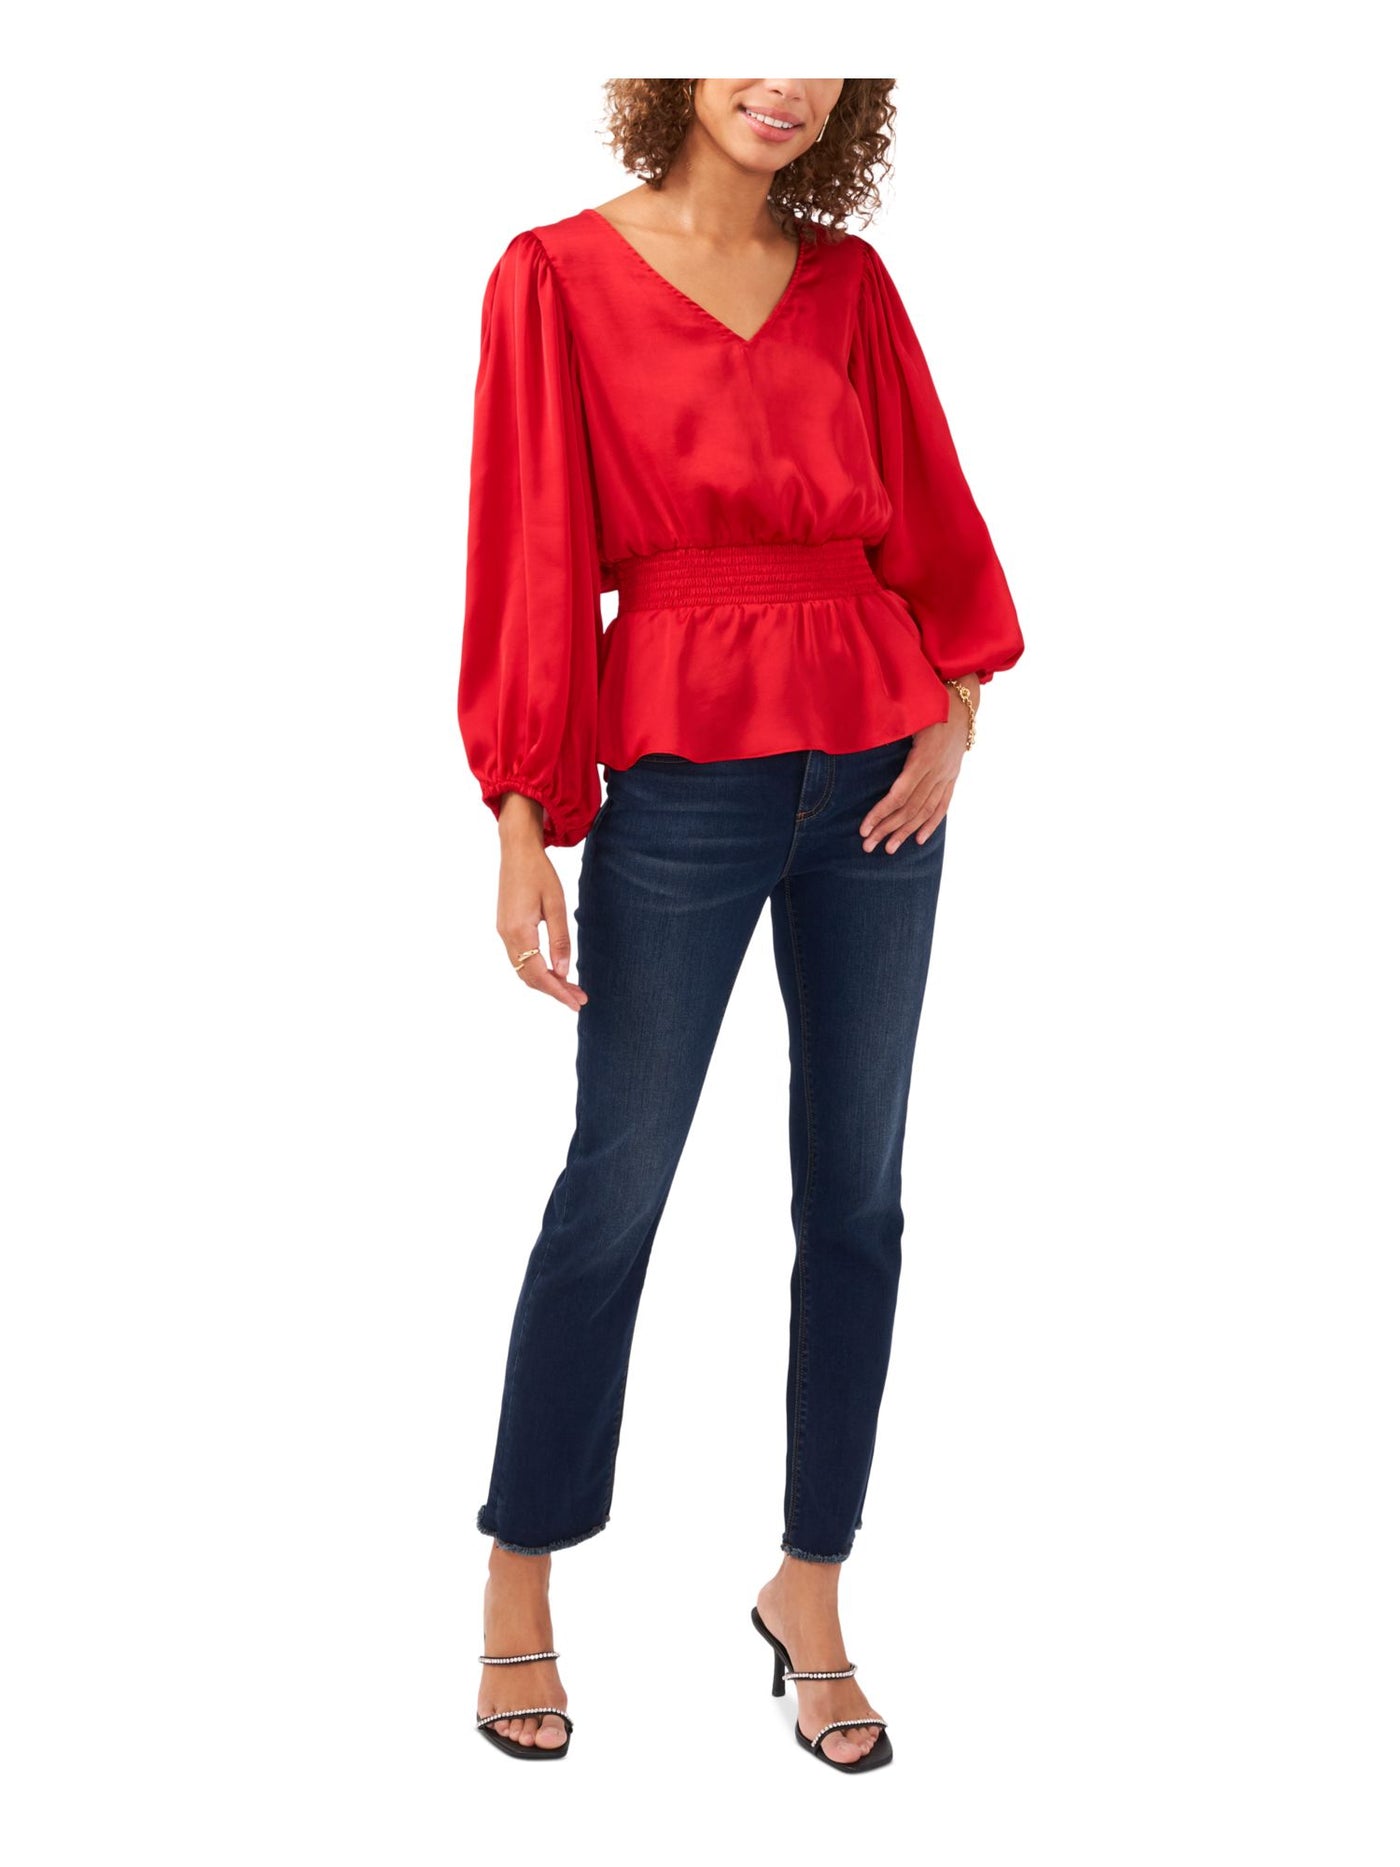 VINCE CAMUTO Womens Red Smocked Pleated Balloon Sleeve V Neck Wear To Work Peplum Top XS